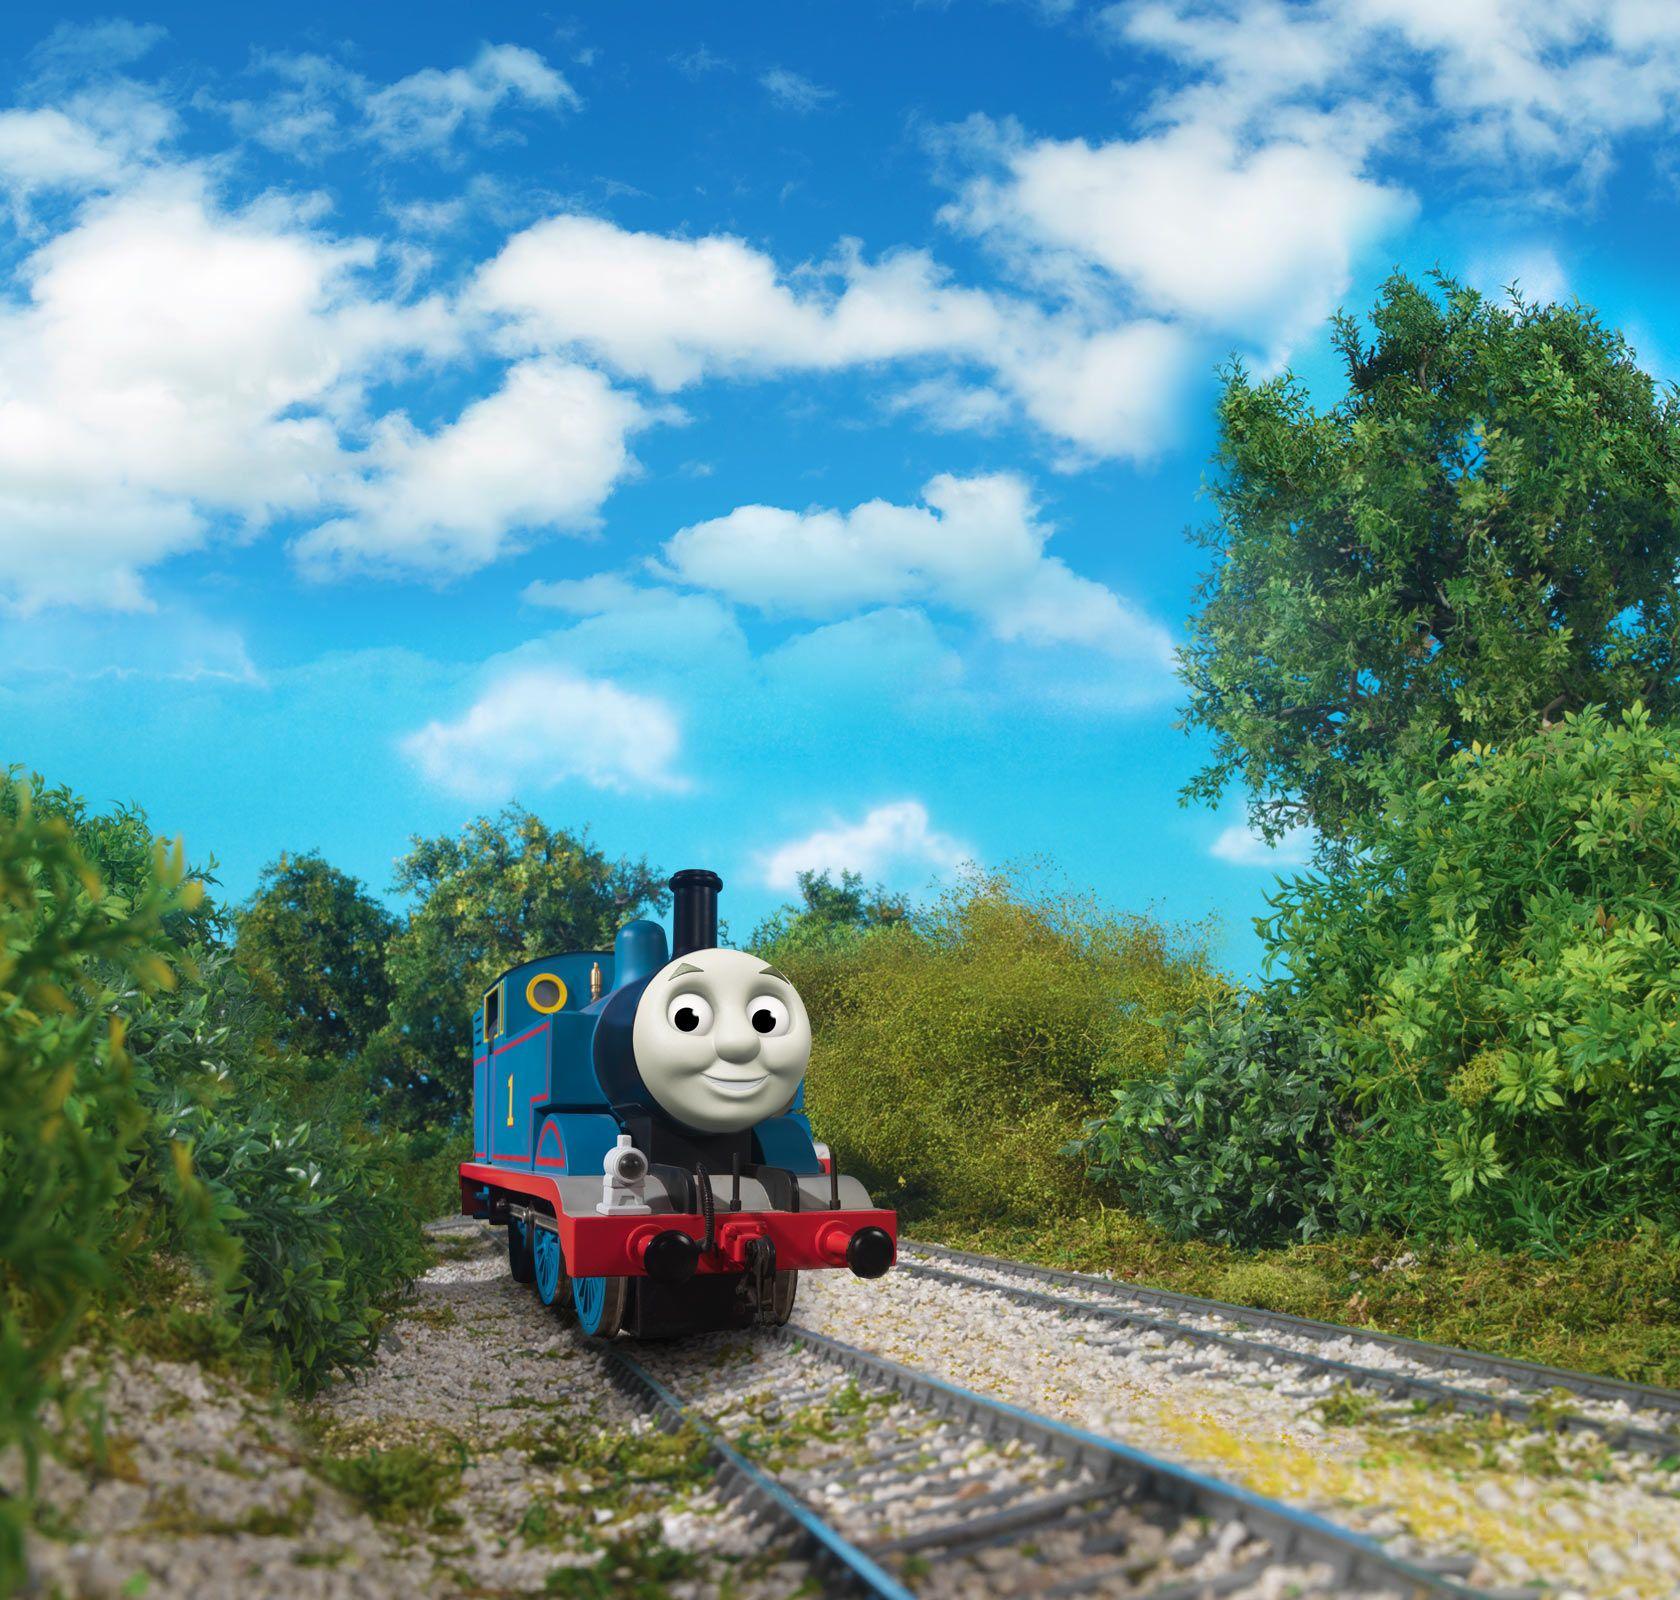 Thomas And Friends Wallpaper. wallpaperxy.com. Movies. Friends